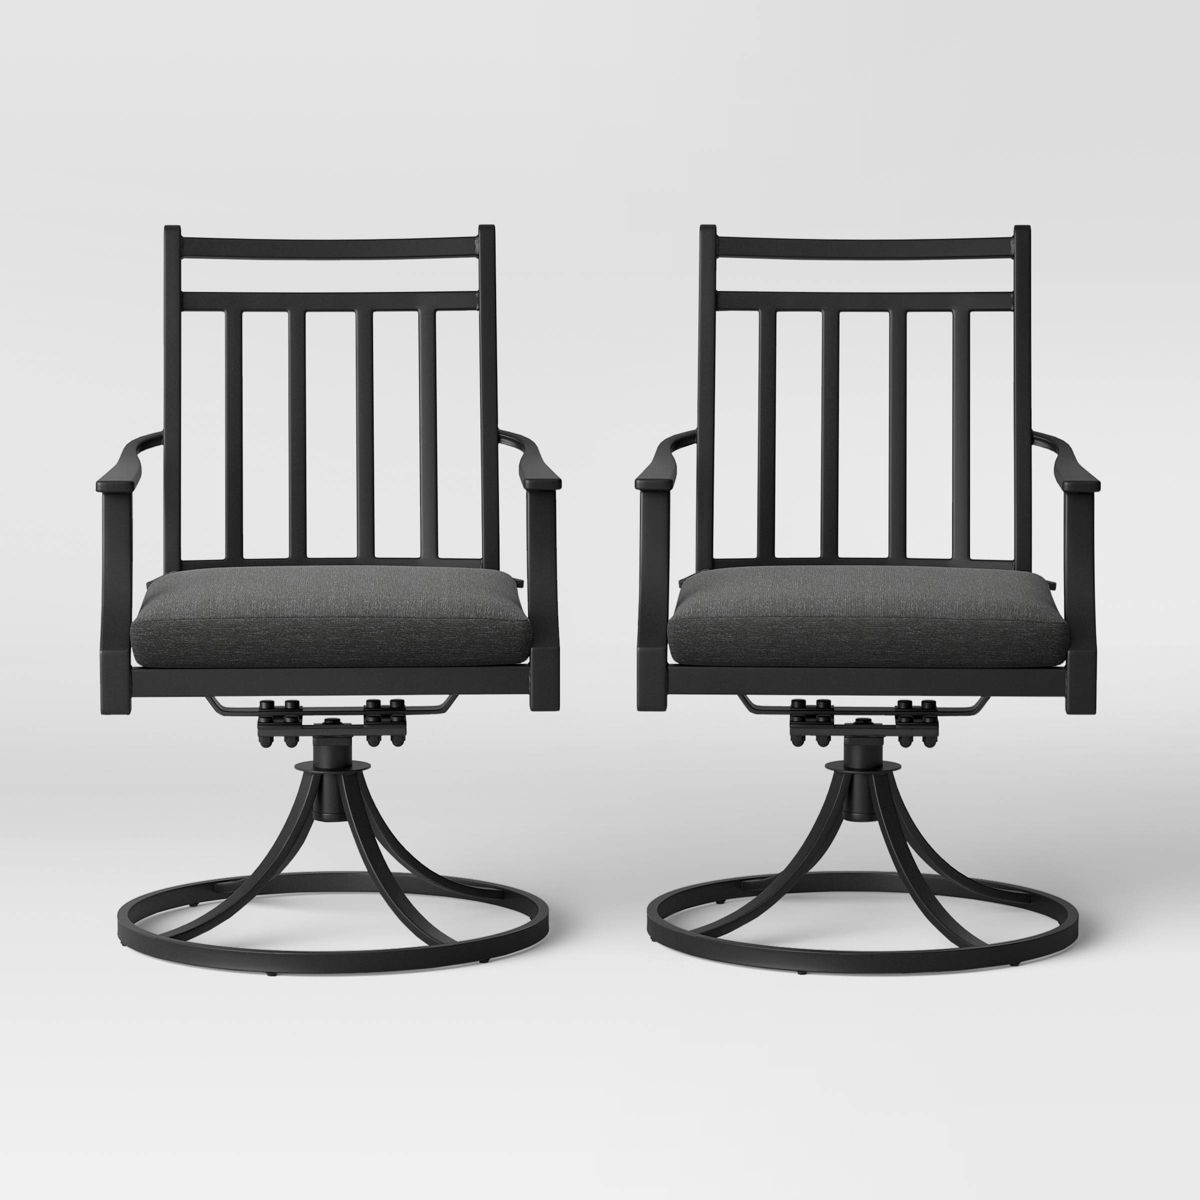 2pc Fairmont Metal Rocking Outdoor Patio Dining Chairs Swivel Chairs Black - Threshold™ | Target